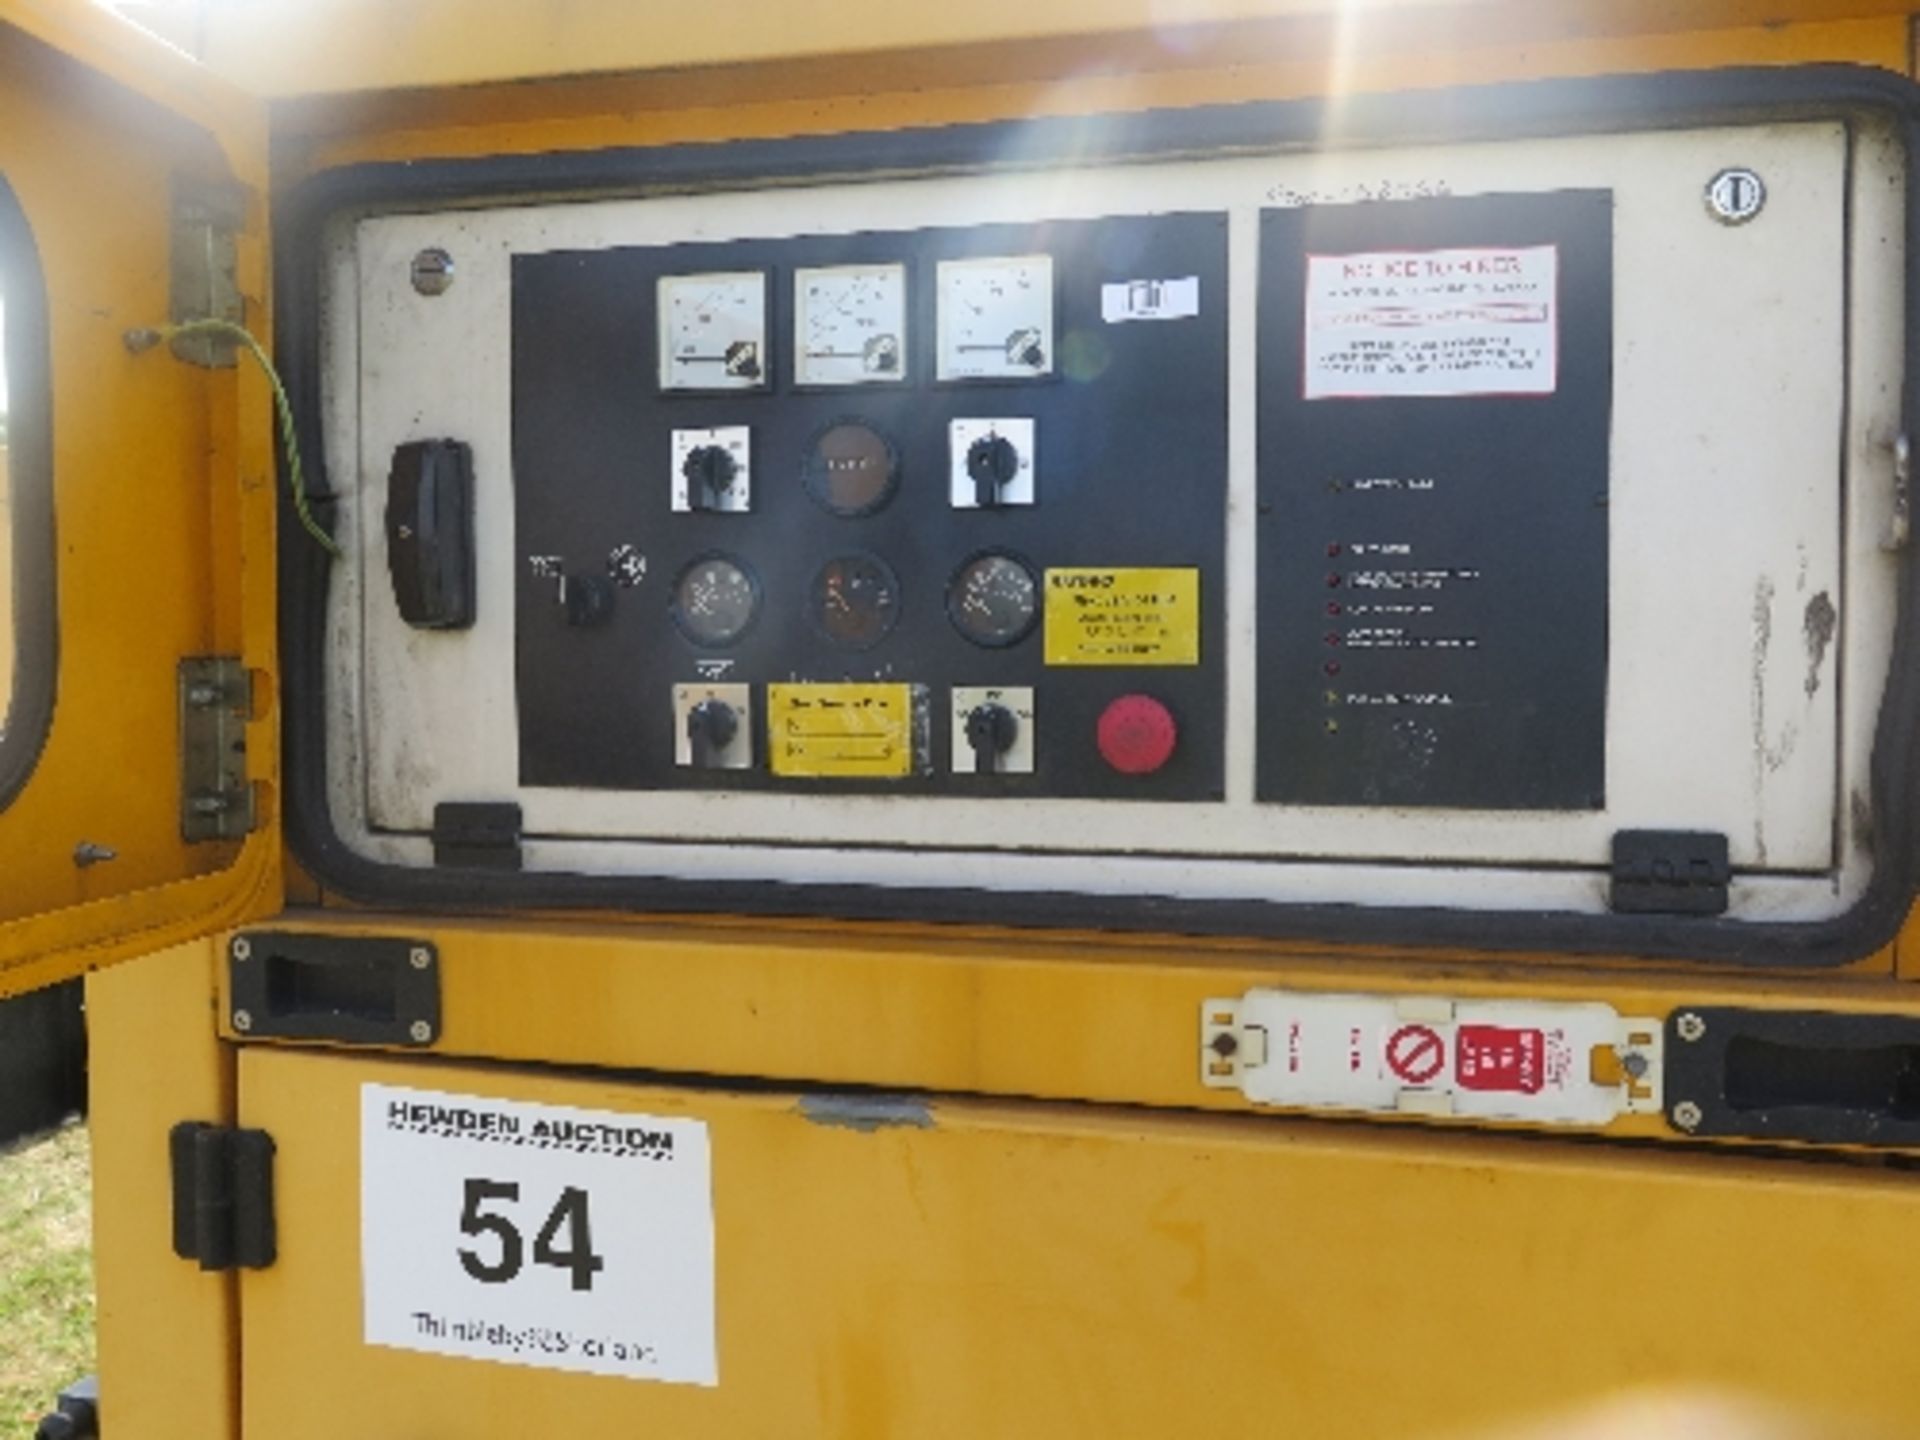 Caterpillar XQE100 generator 15066 hrs 158066
PERKINS - RUNS AND MAKES POWER
ALL LOTS are SOLD - Image 5 of 7